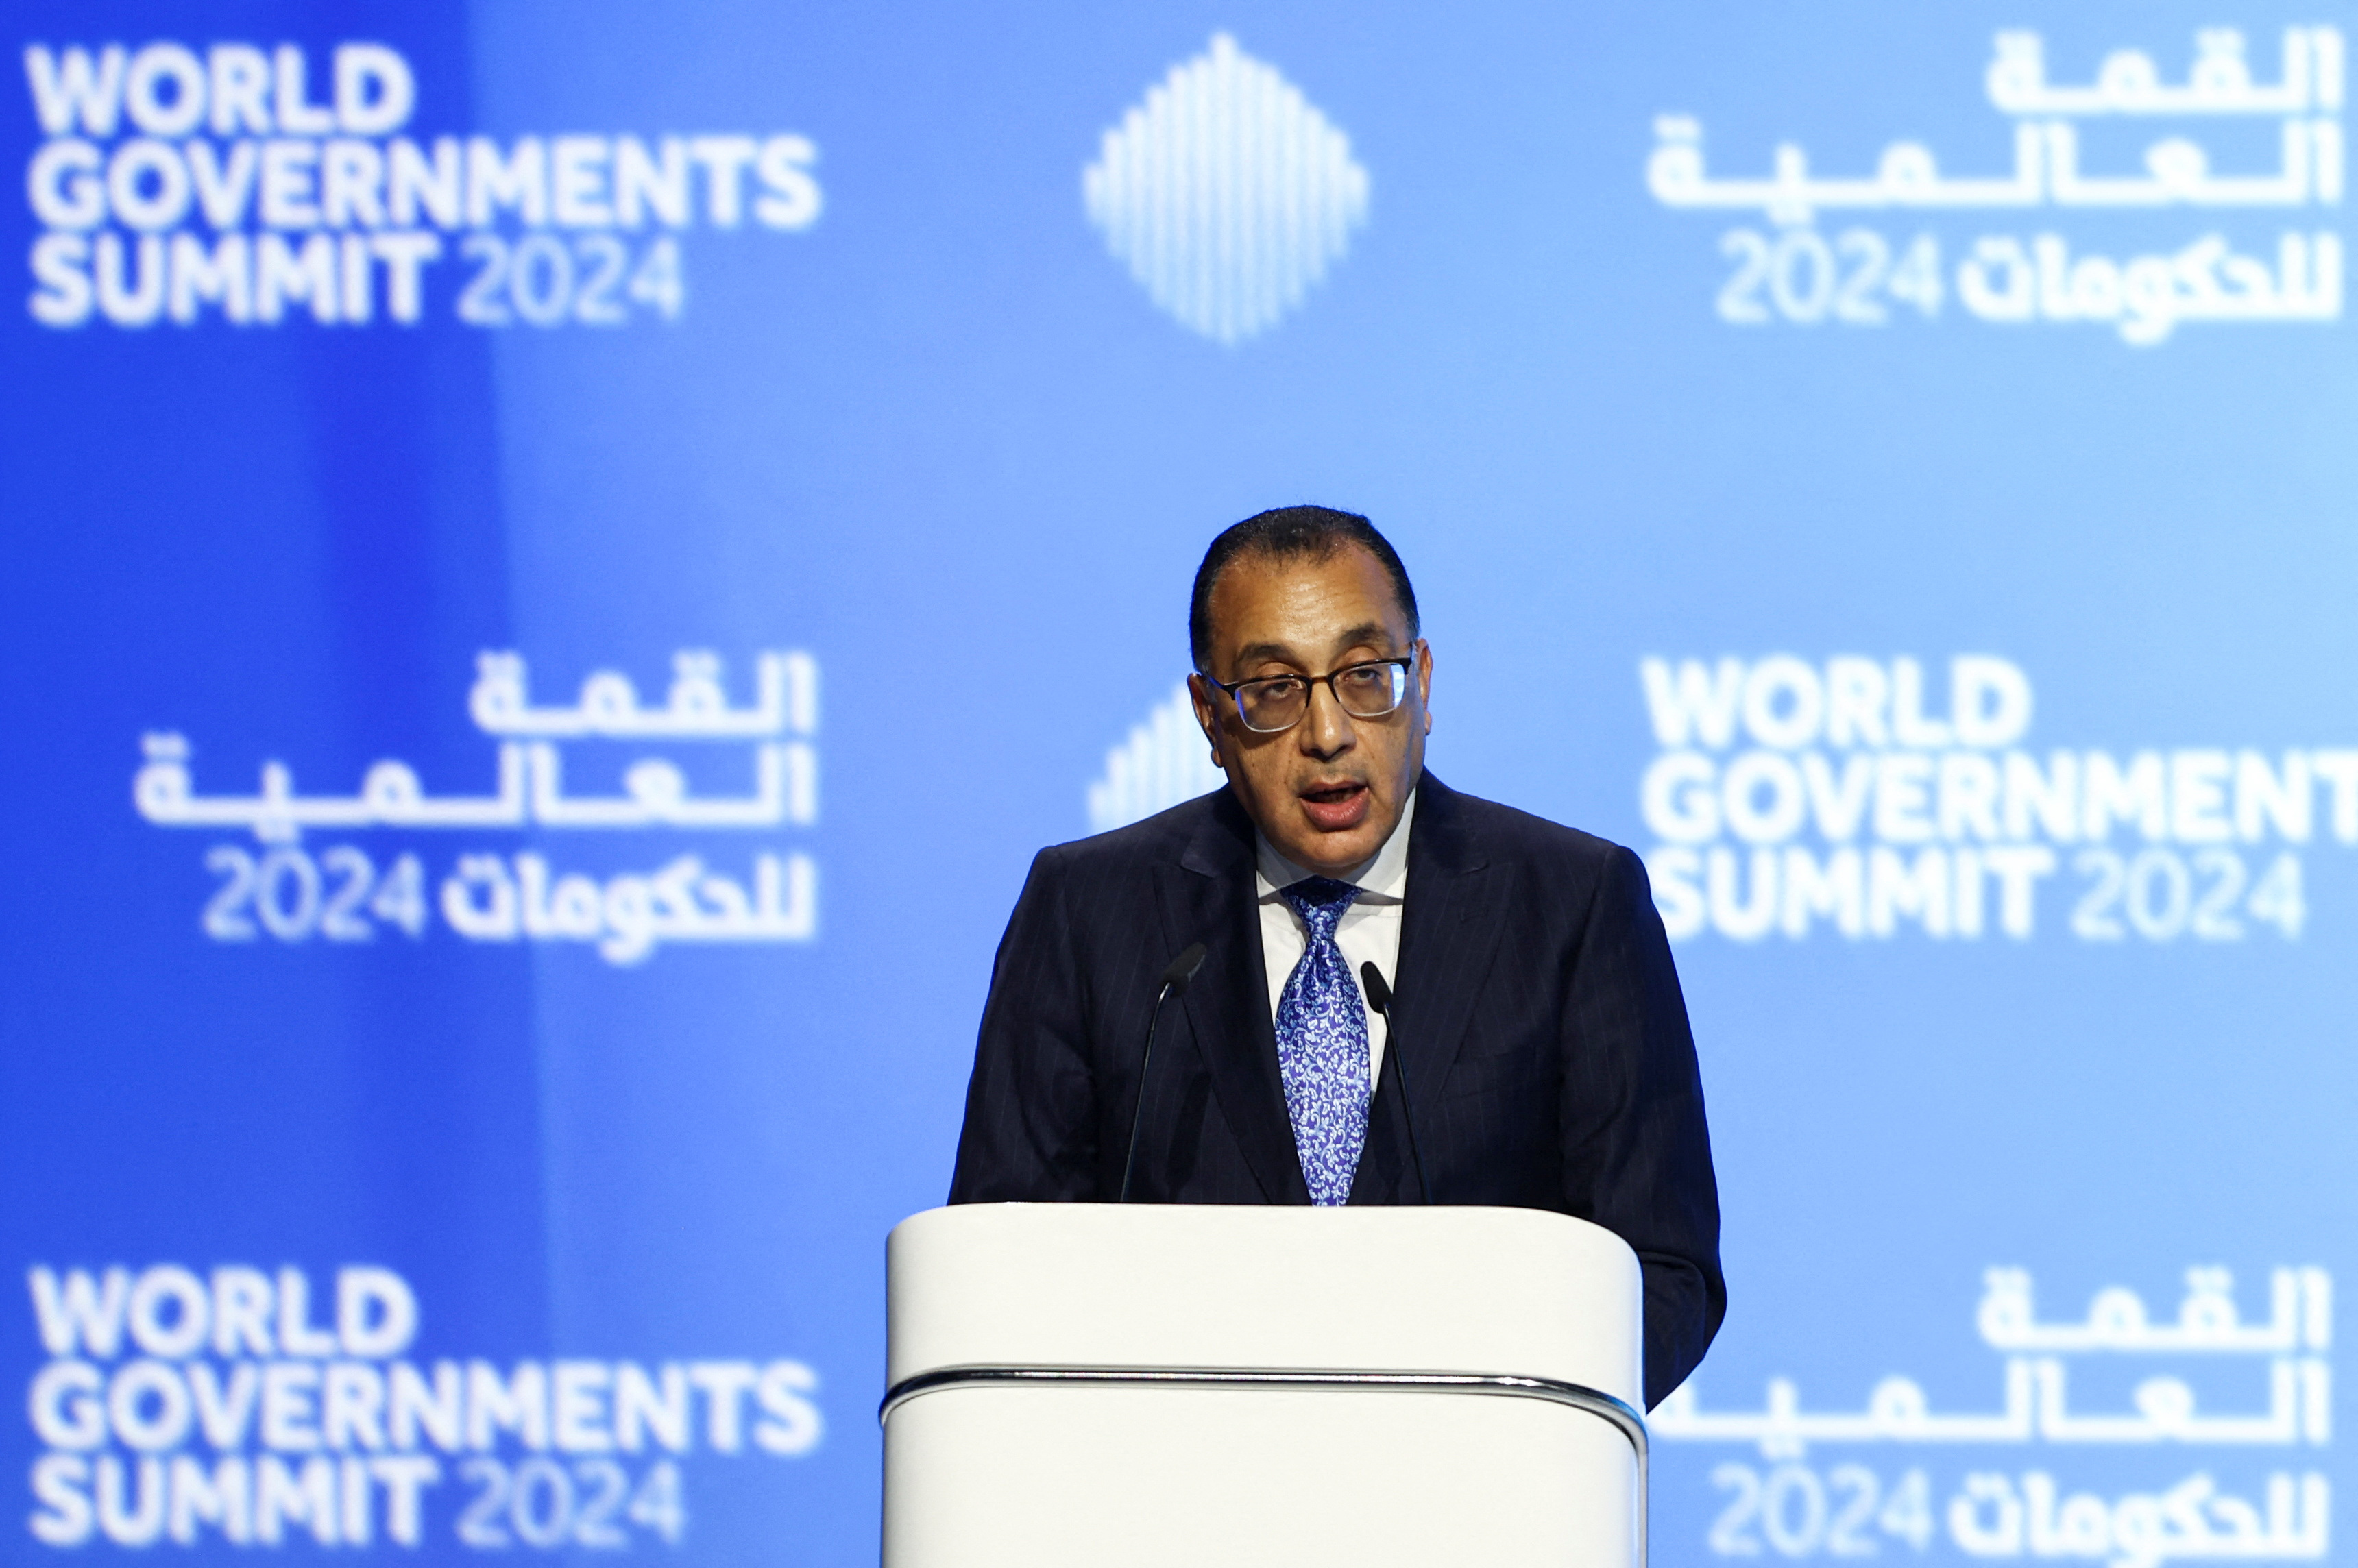 The World Governments Summit takes place in Dubai